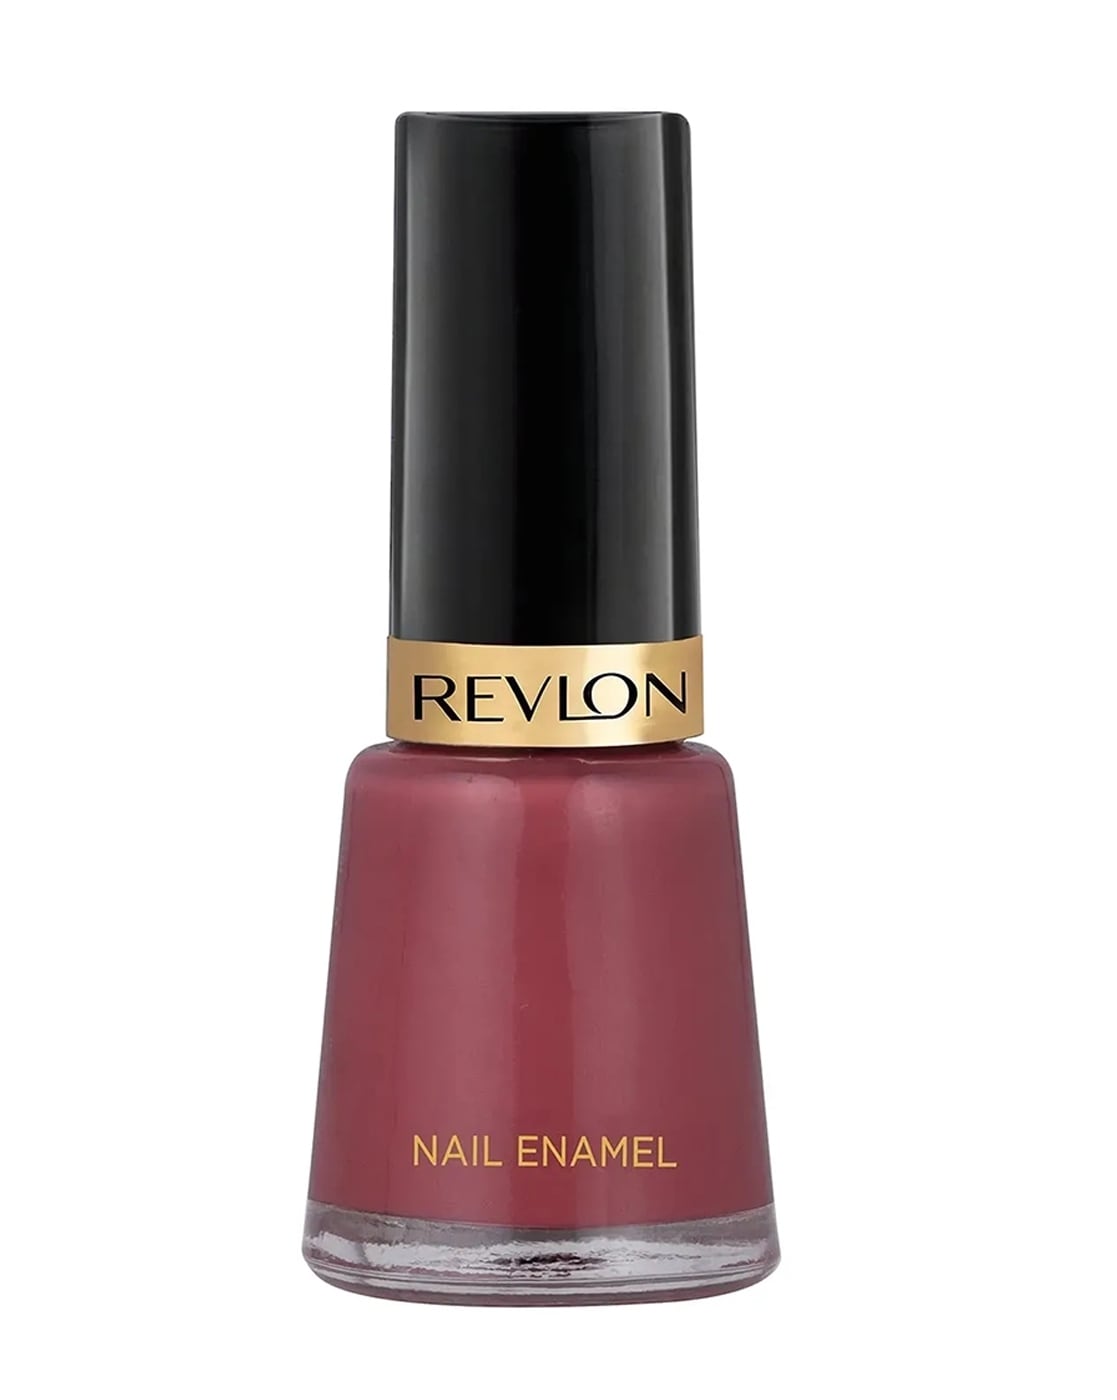 Buy Revlon Nail Enamel, Chip Resistant Nail Polish, Glossy Shine Finish, in  Blue/Green, 495 Sultry, 0.5 oz Online at Low Prices in India - Amazon.in